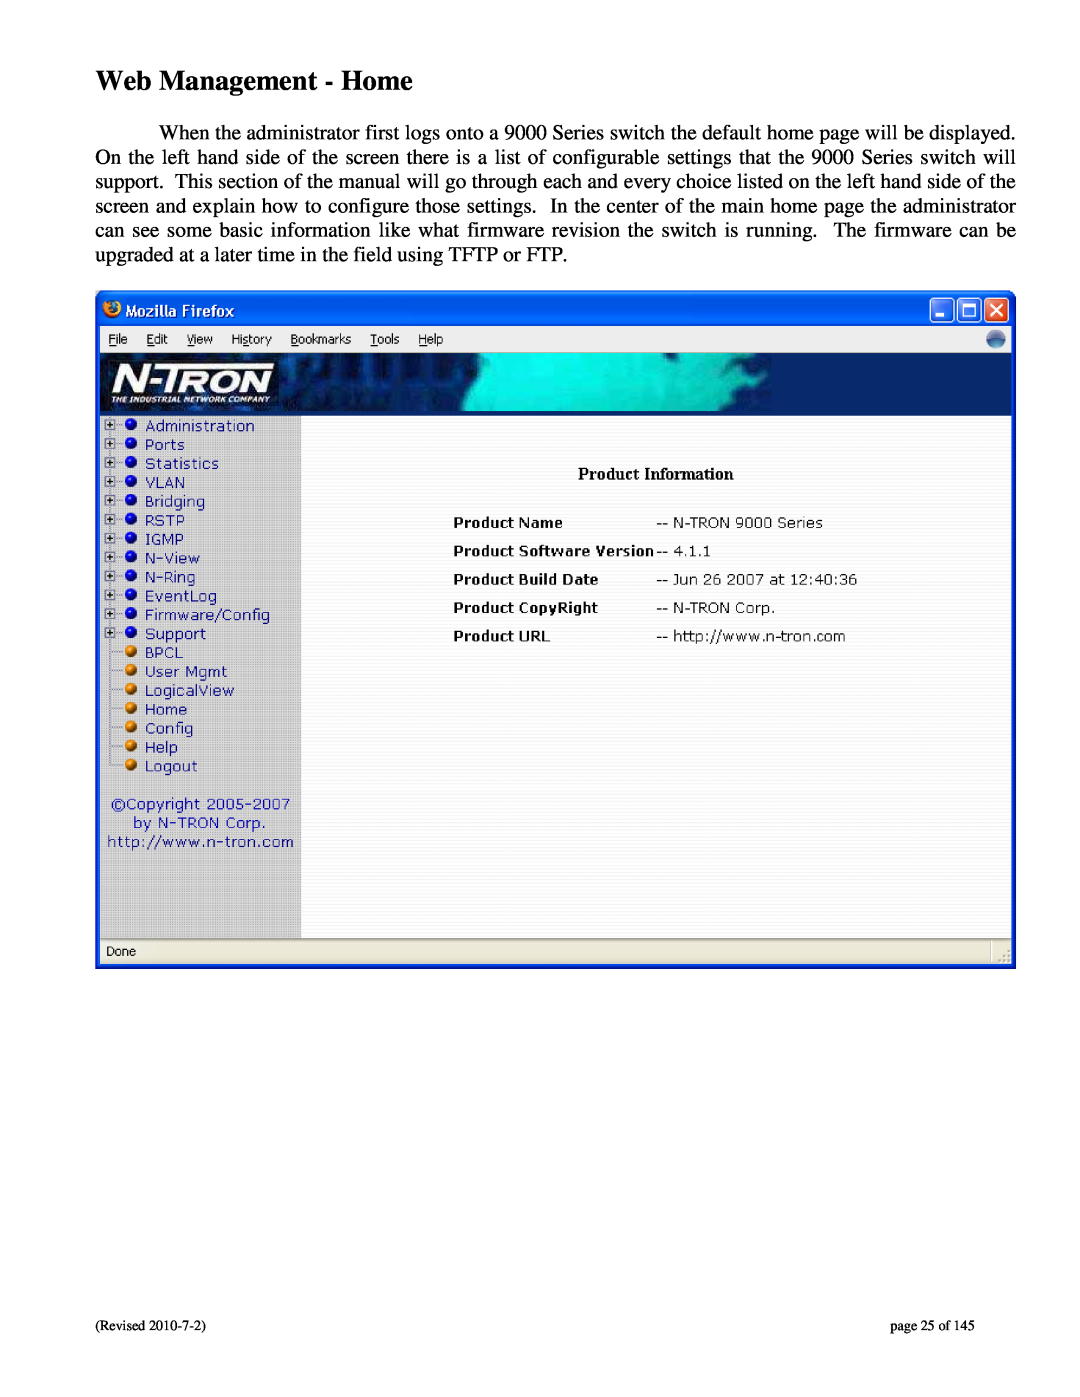 N-Tron 9000 user manual Web Management - Home, page 25 of 